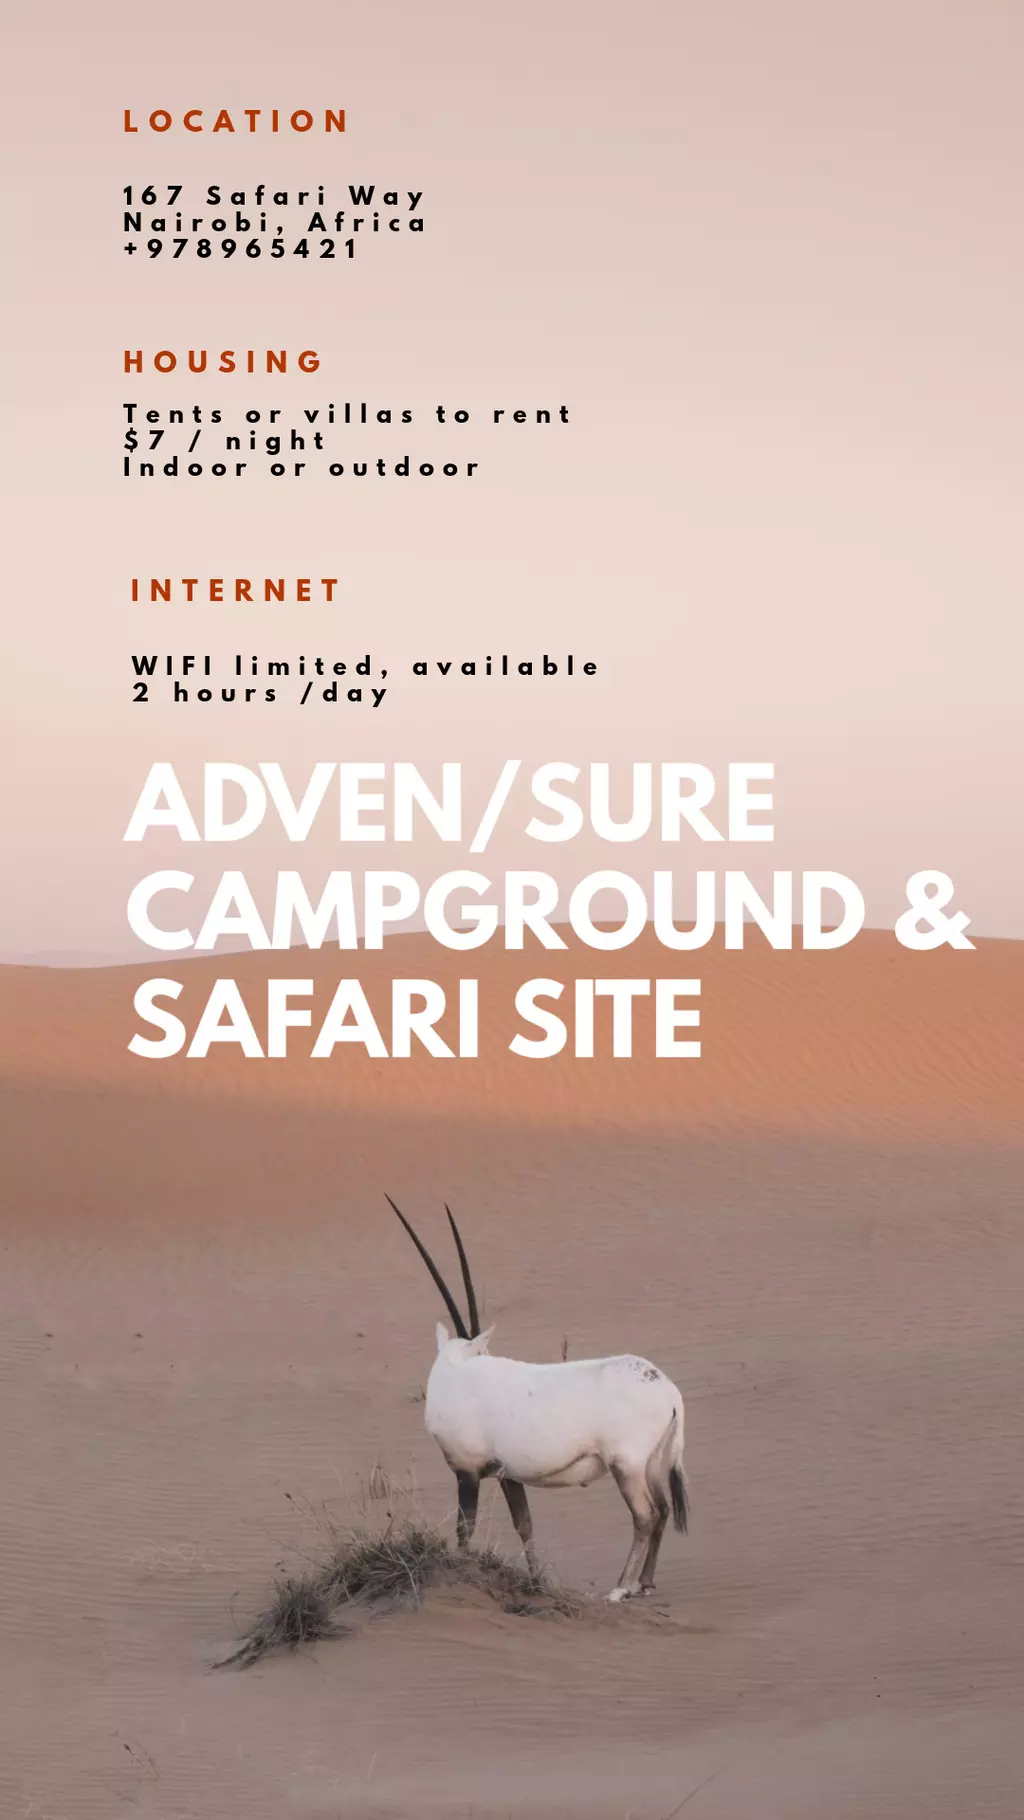 Brochure template with photo of an antelope in the desert under location information